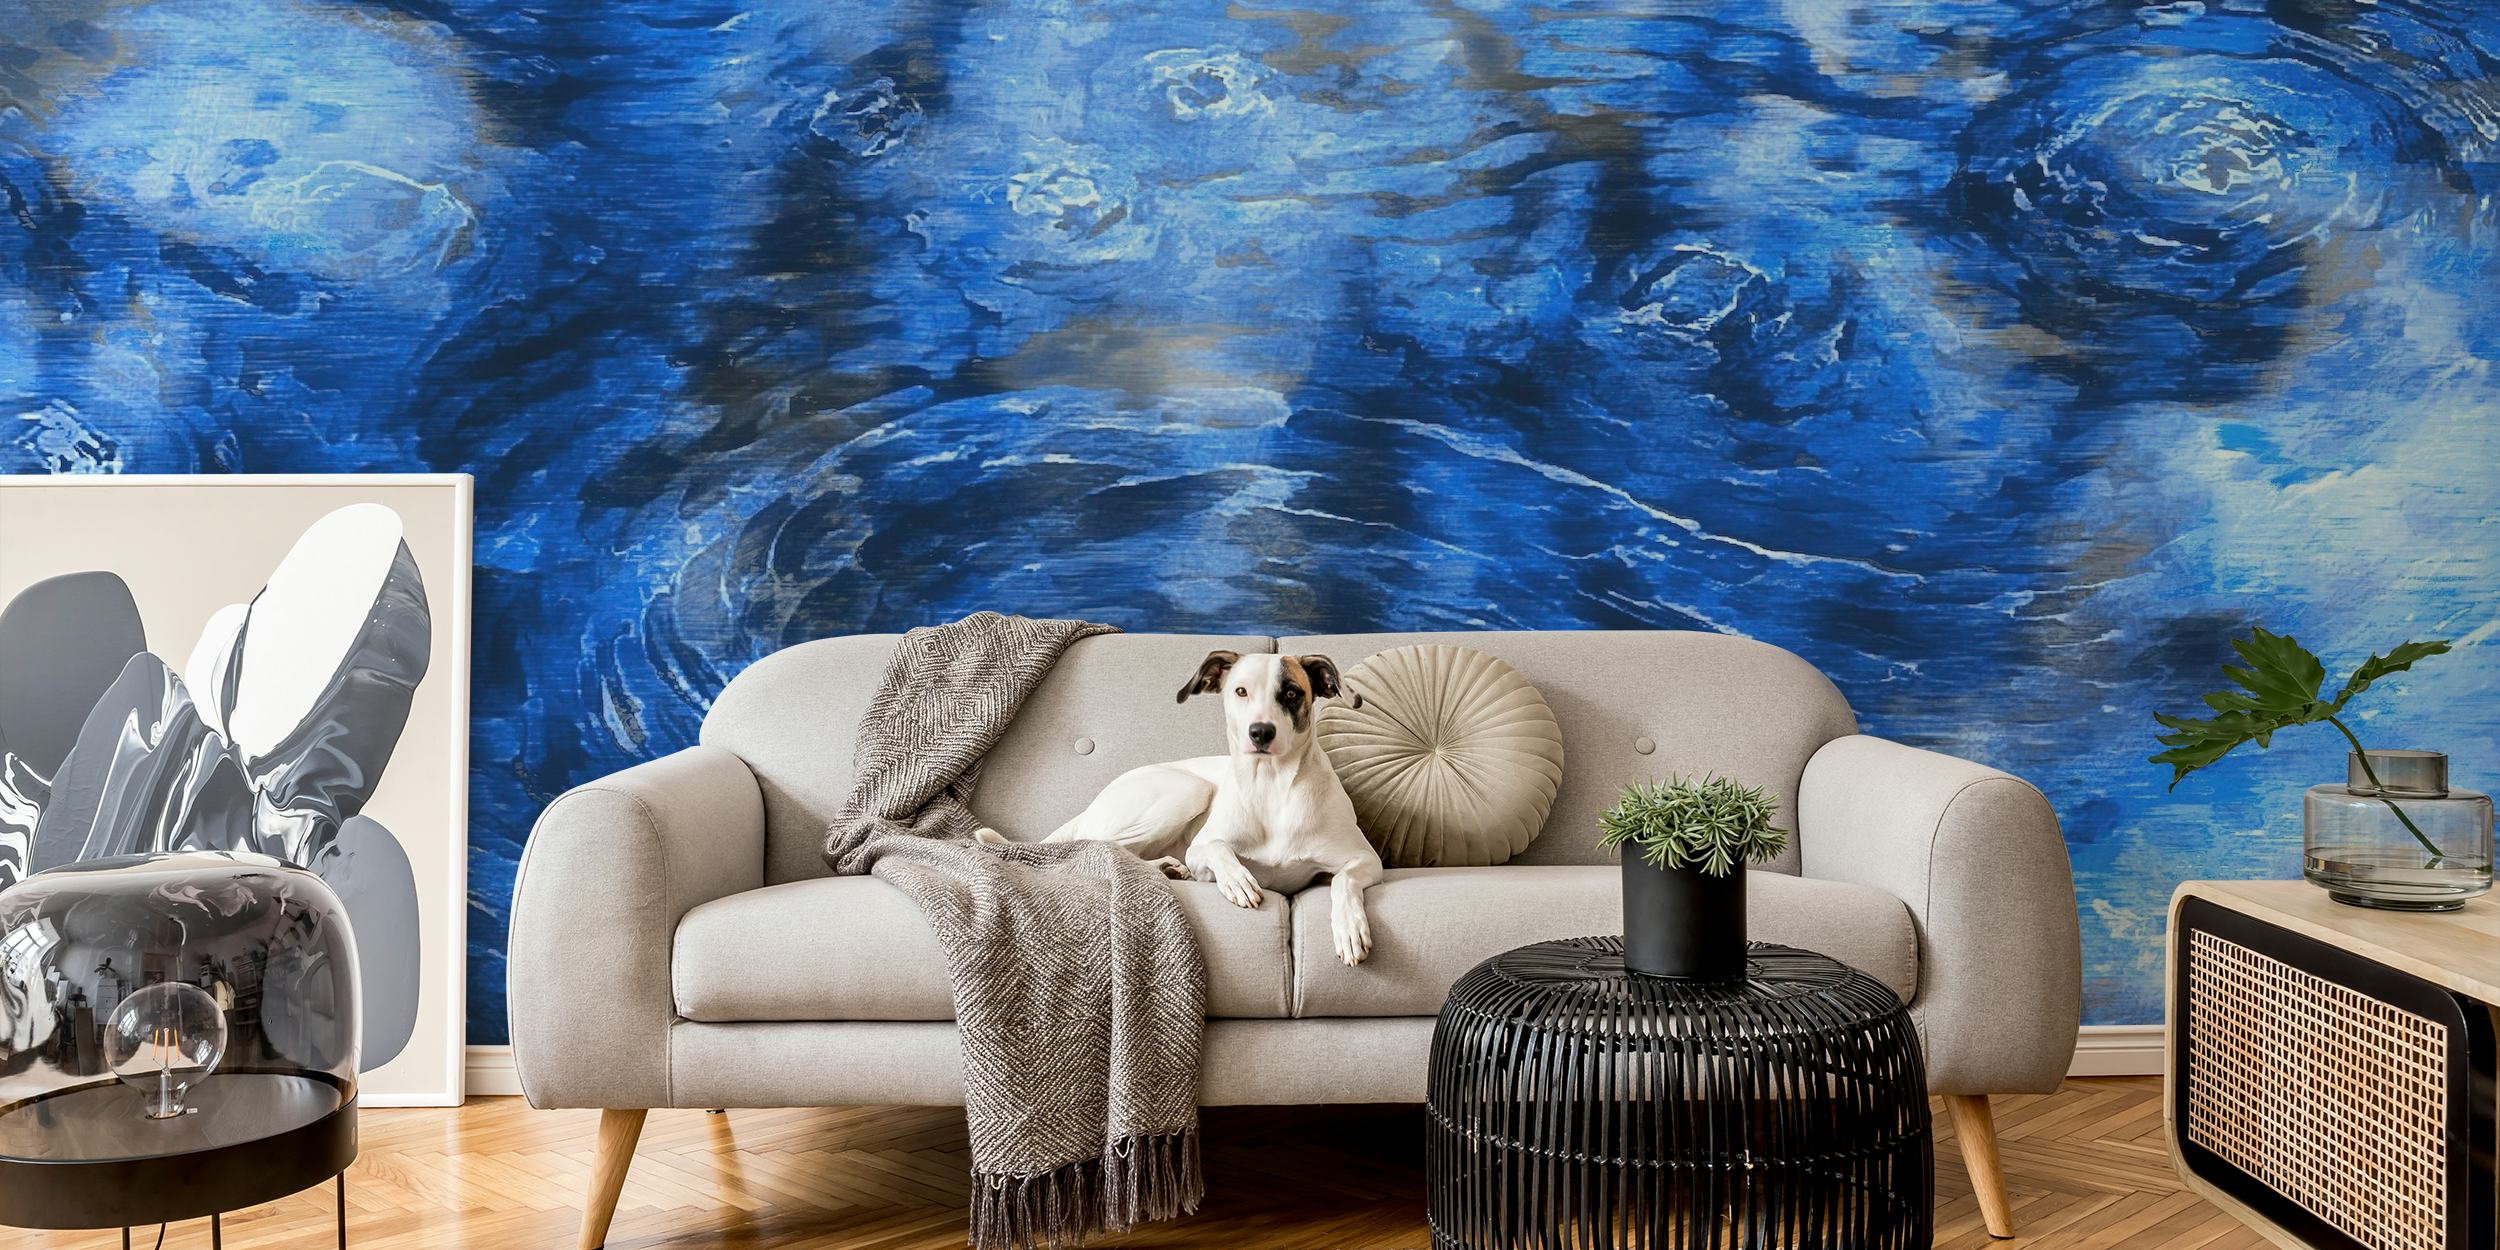 Impressionist-style Van Gogh Clouds wall mural with swirling blue and white patterns